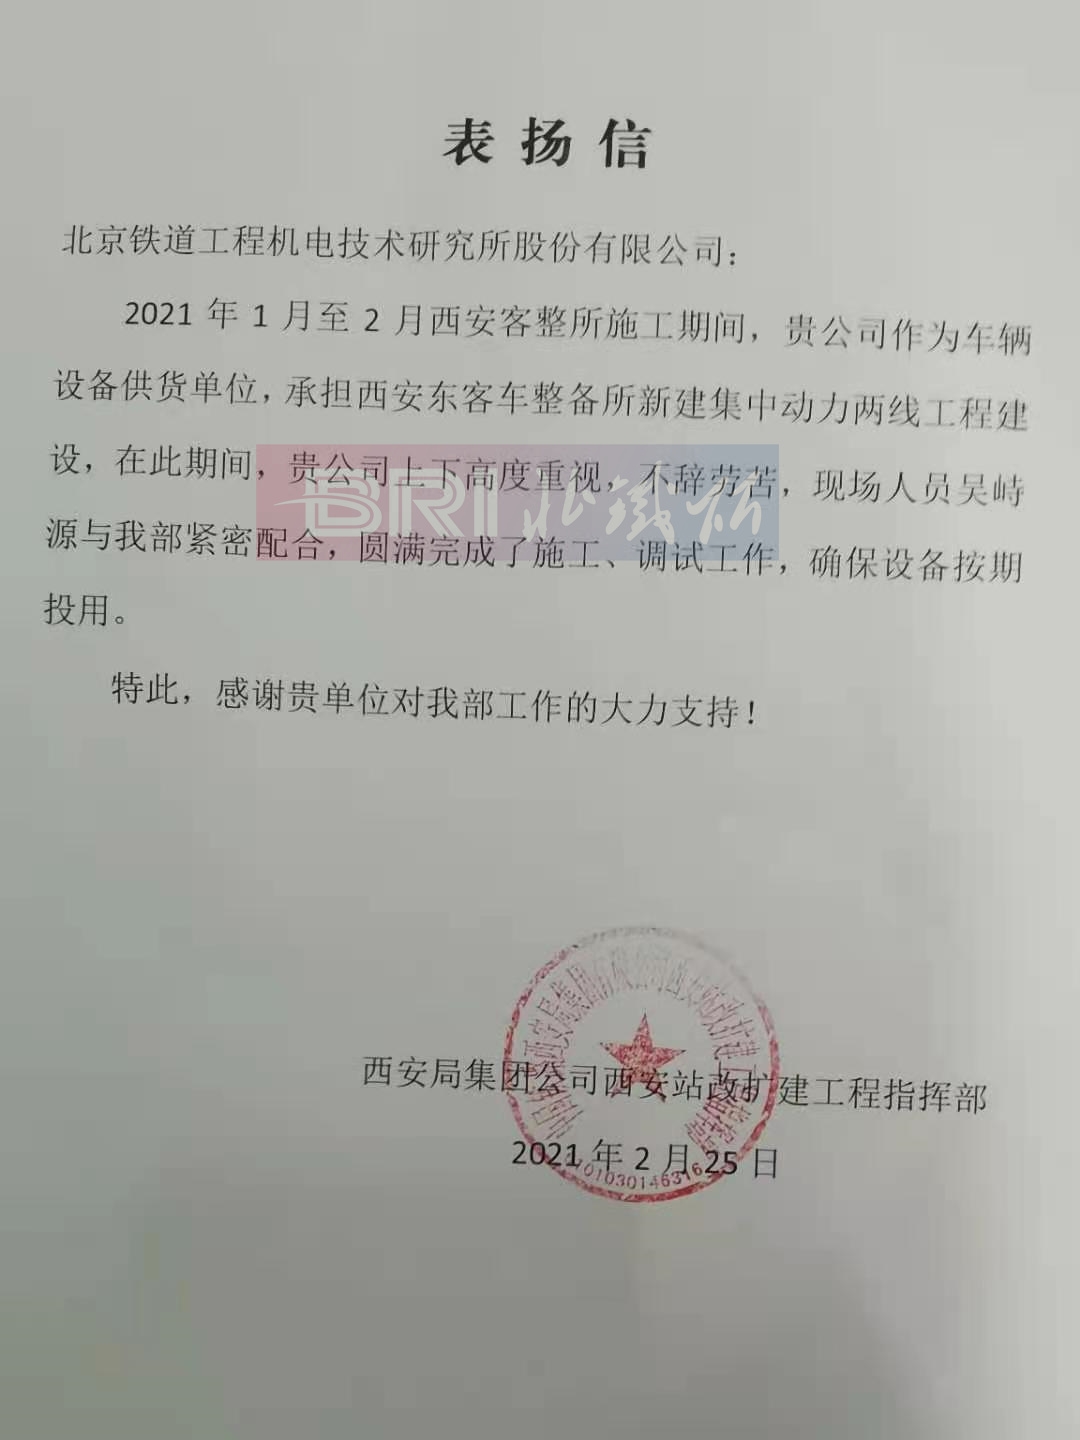 The commendation letter from the Reconstruction and Expansion Project Headquarters in Xian Railway Station.